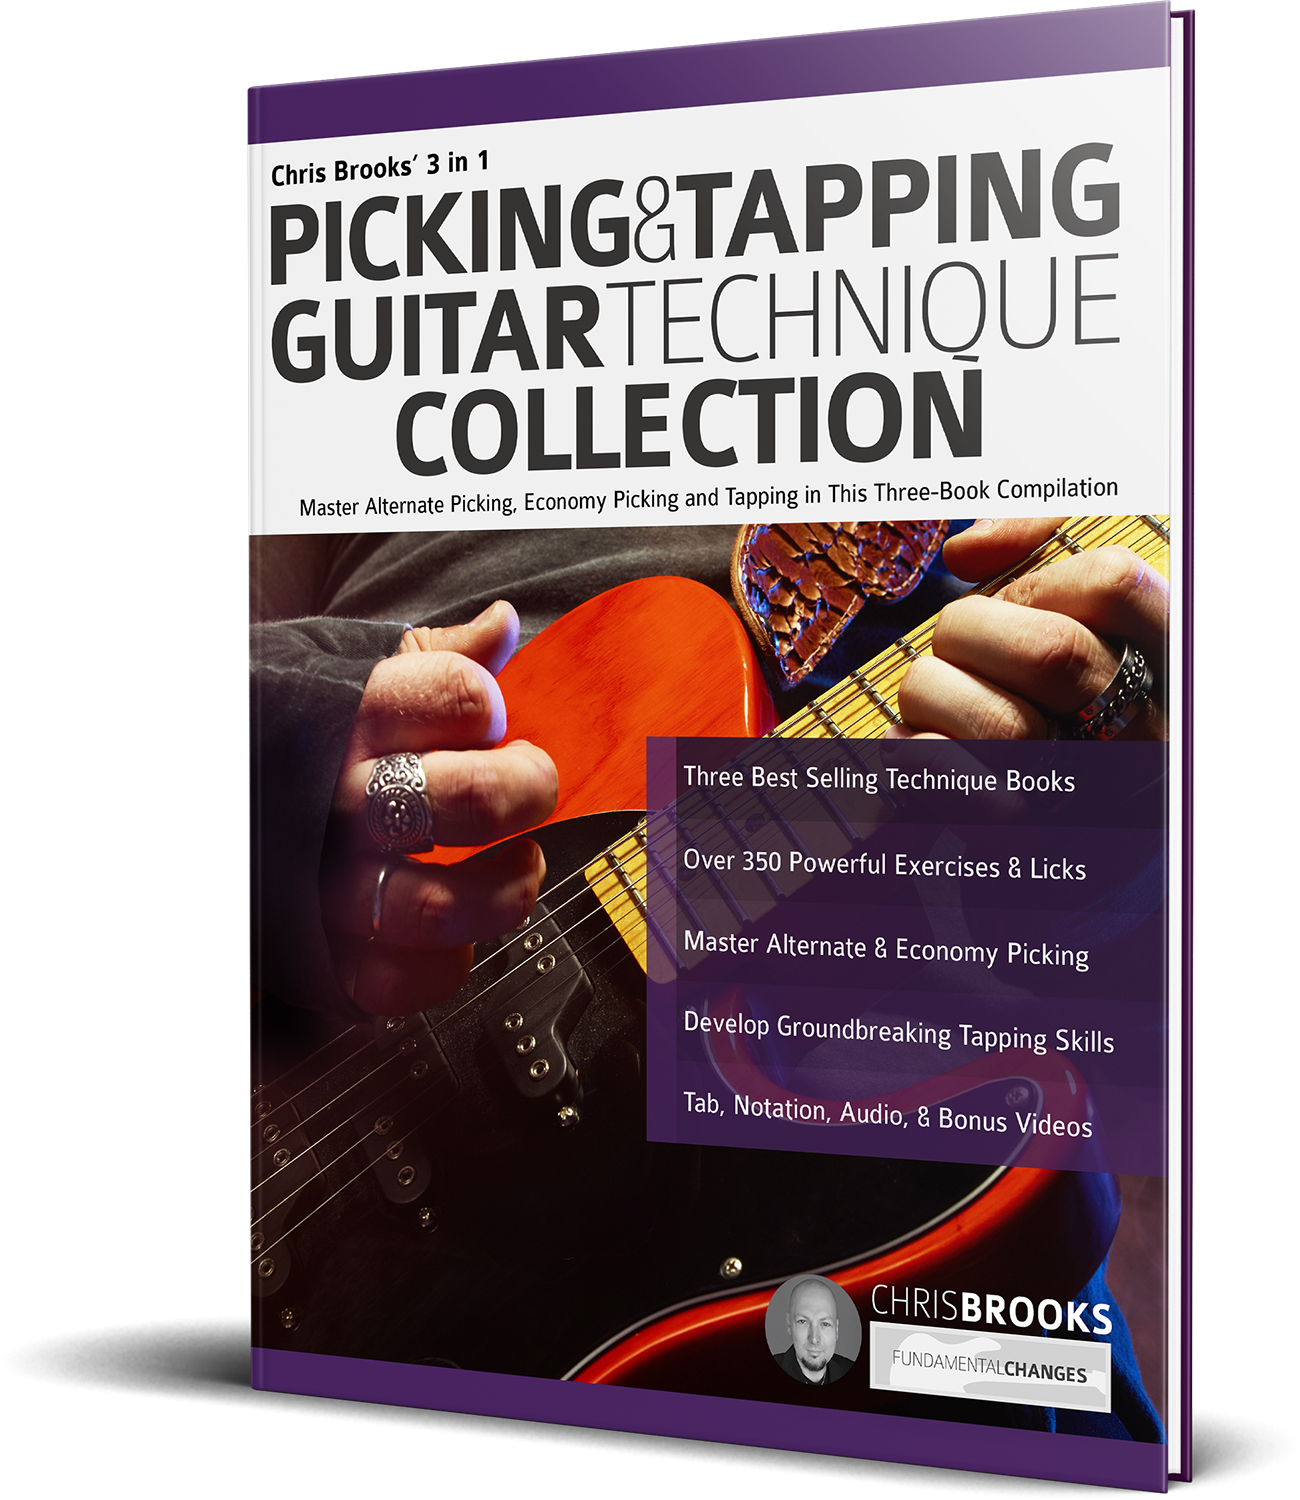 Chris Brooks' Picking and Tapping Guitar Technique Collection